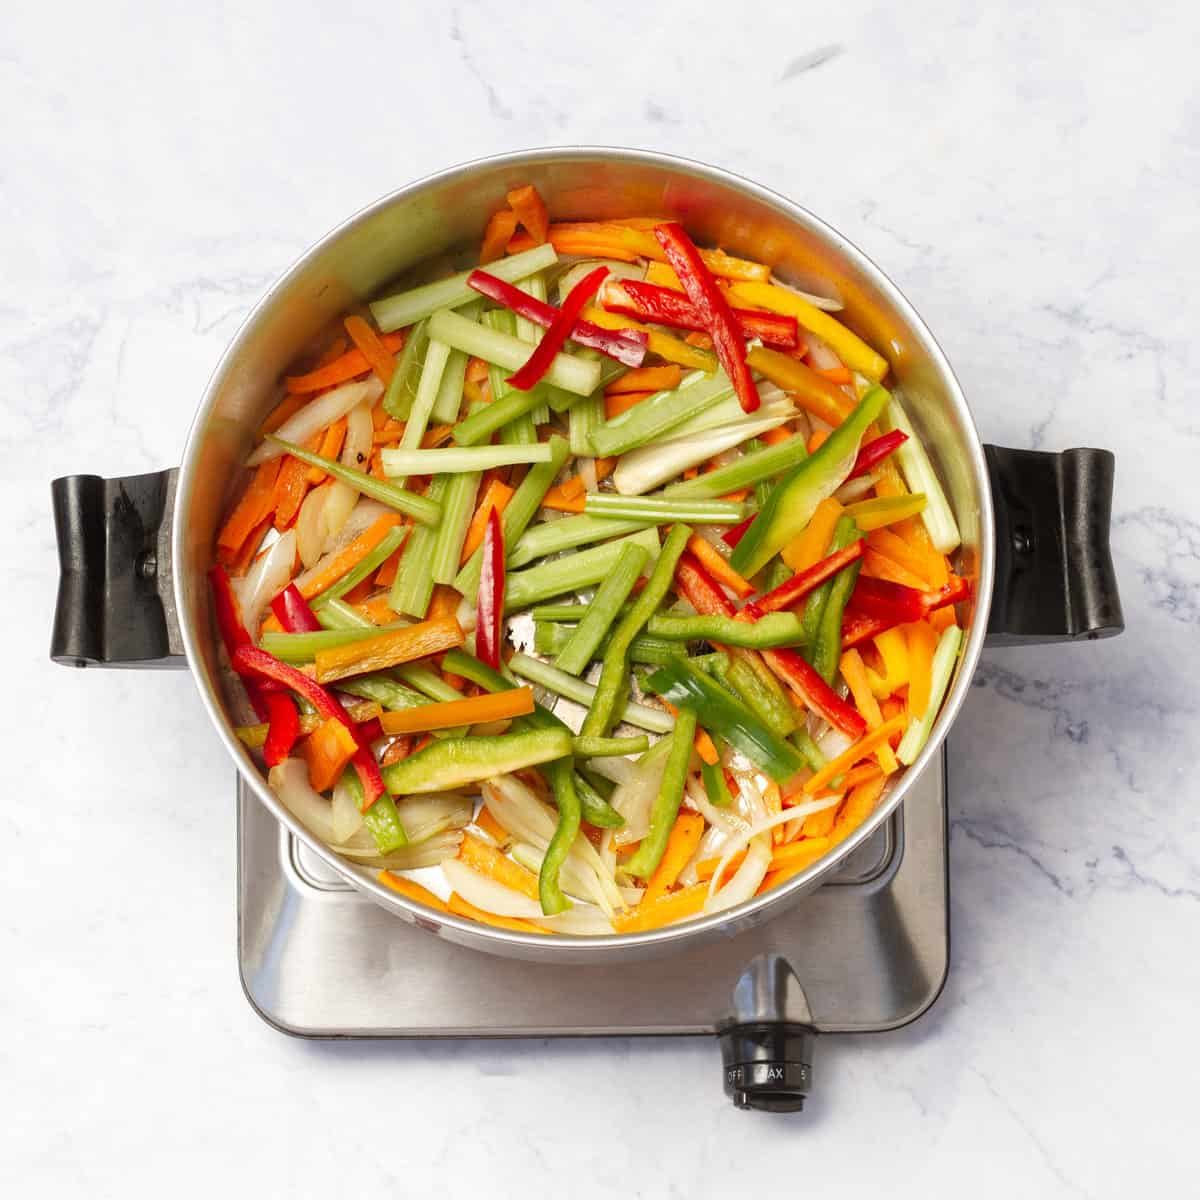 cooking onion, carrot, bell peppers, and celery in a skillet